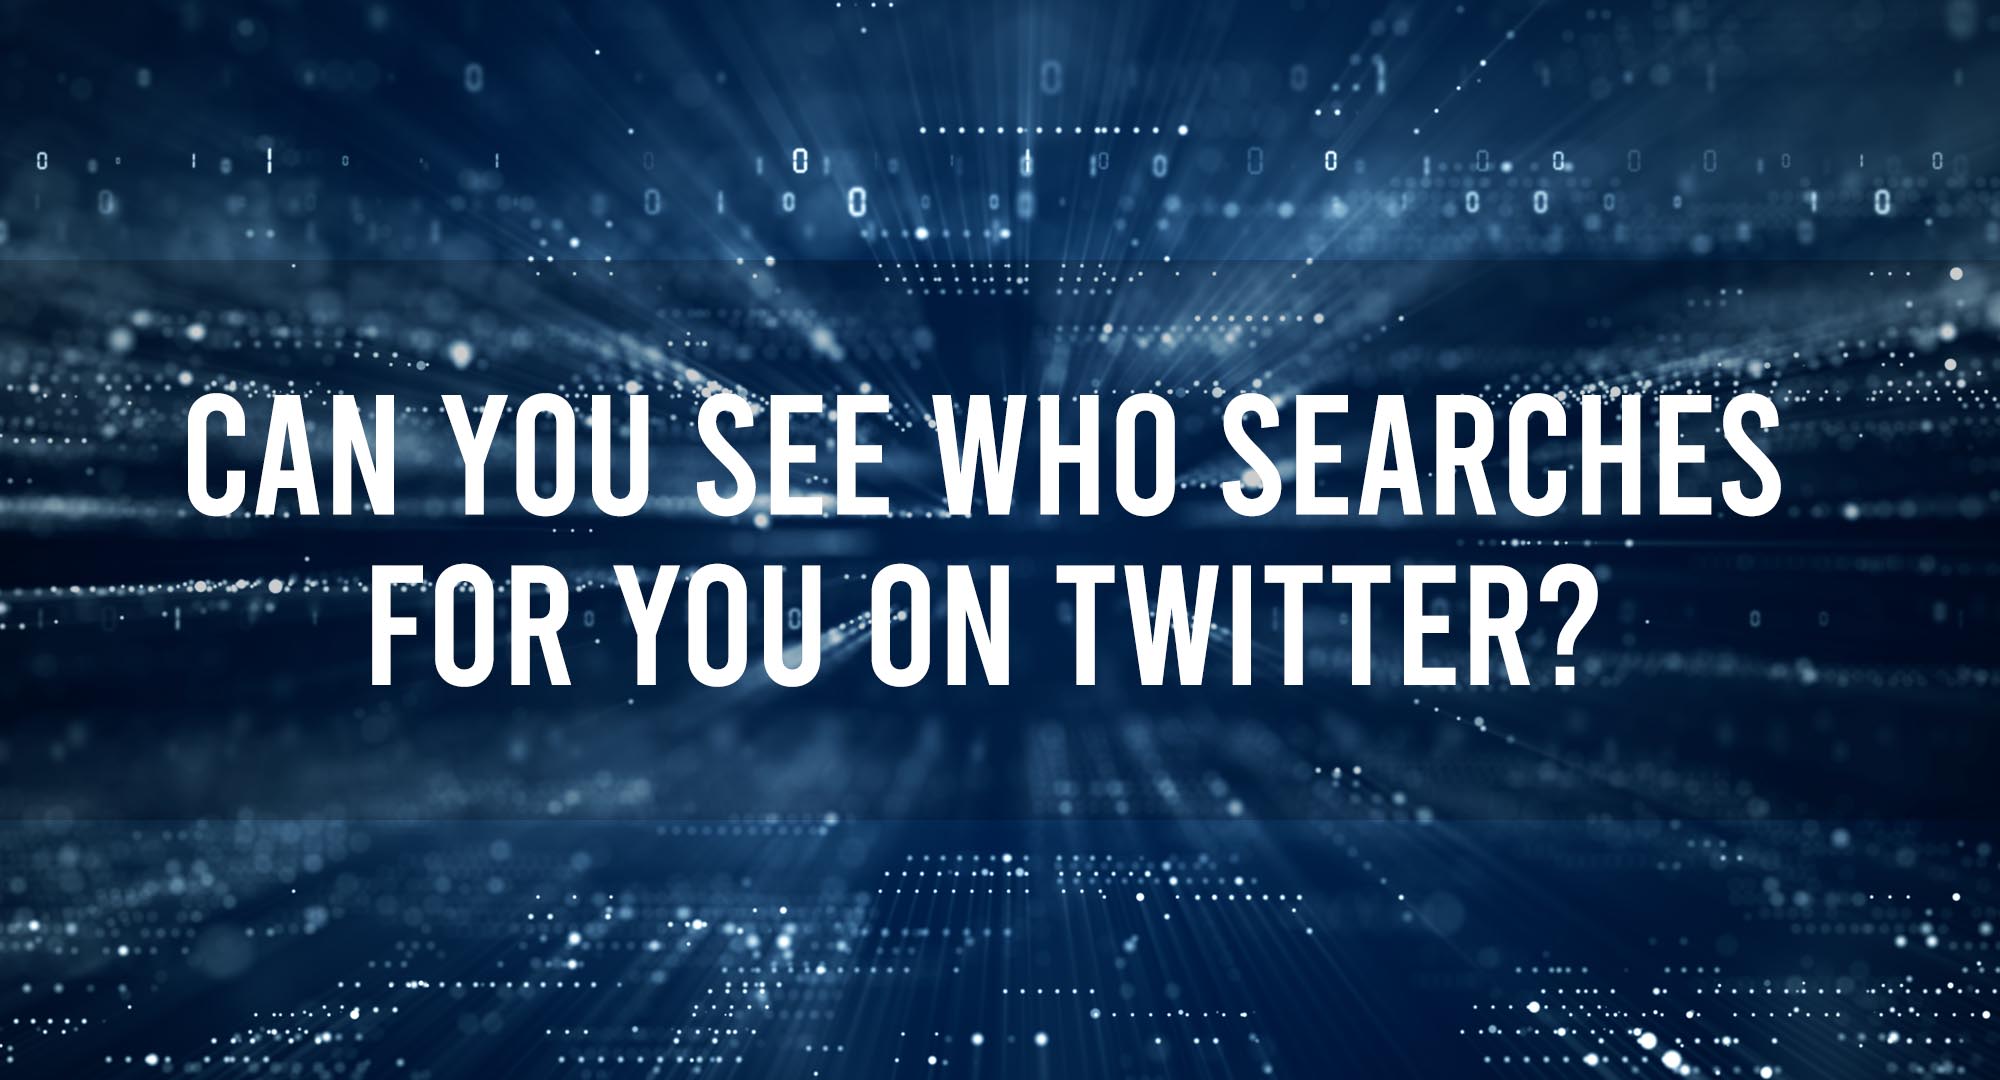 Can you see who searches for you on twitter